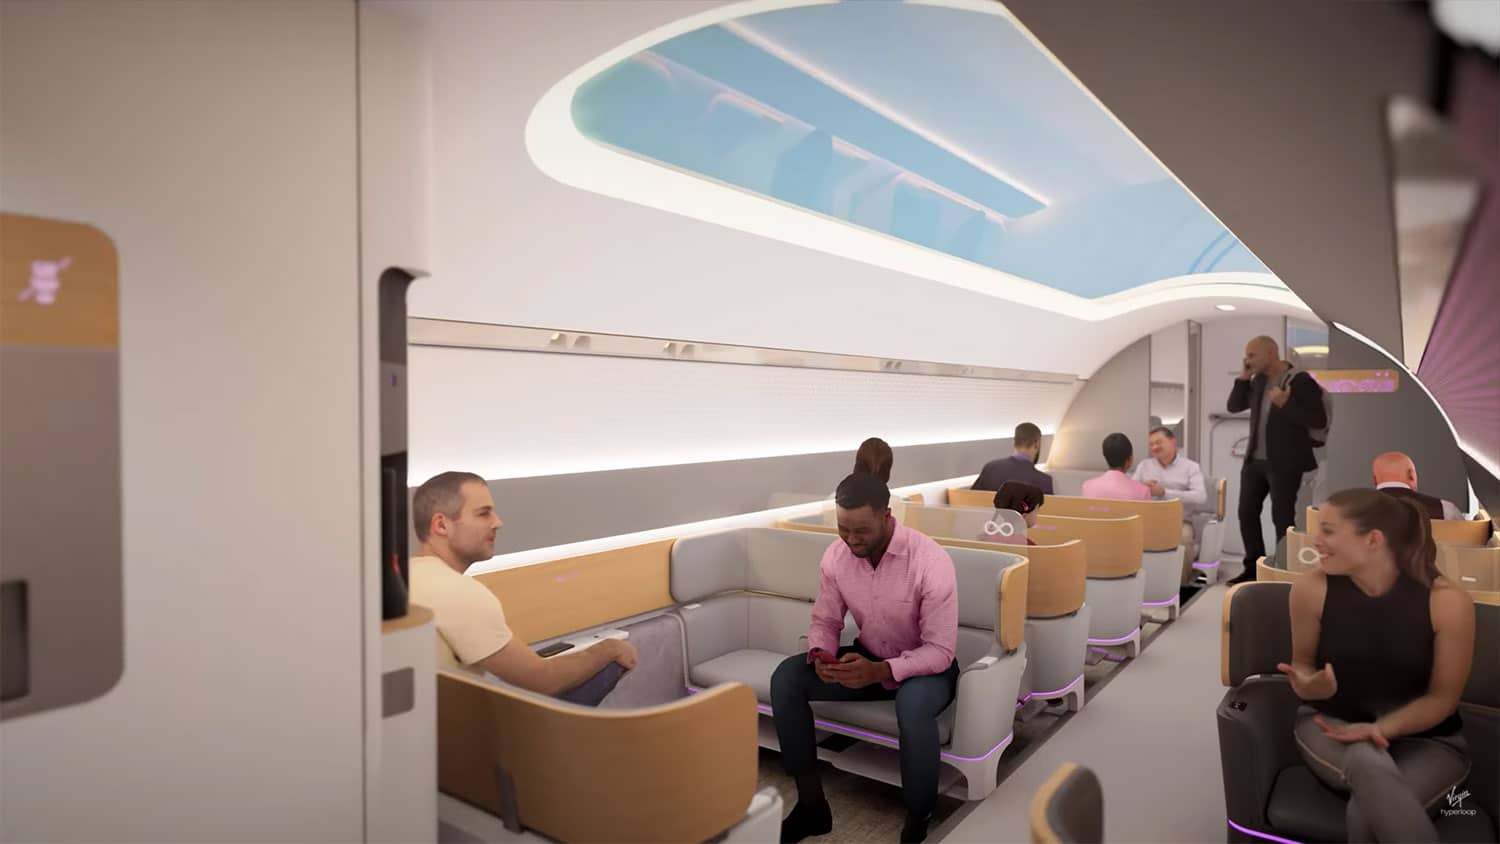 Virgin Hyperloop shows its vision for the future hyperloop experience.